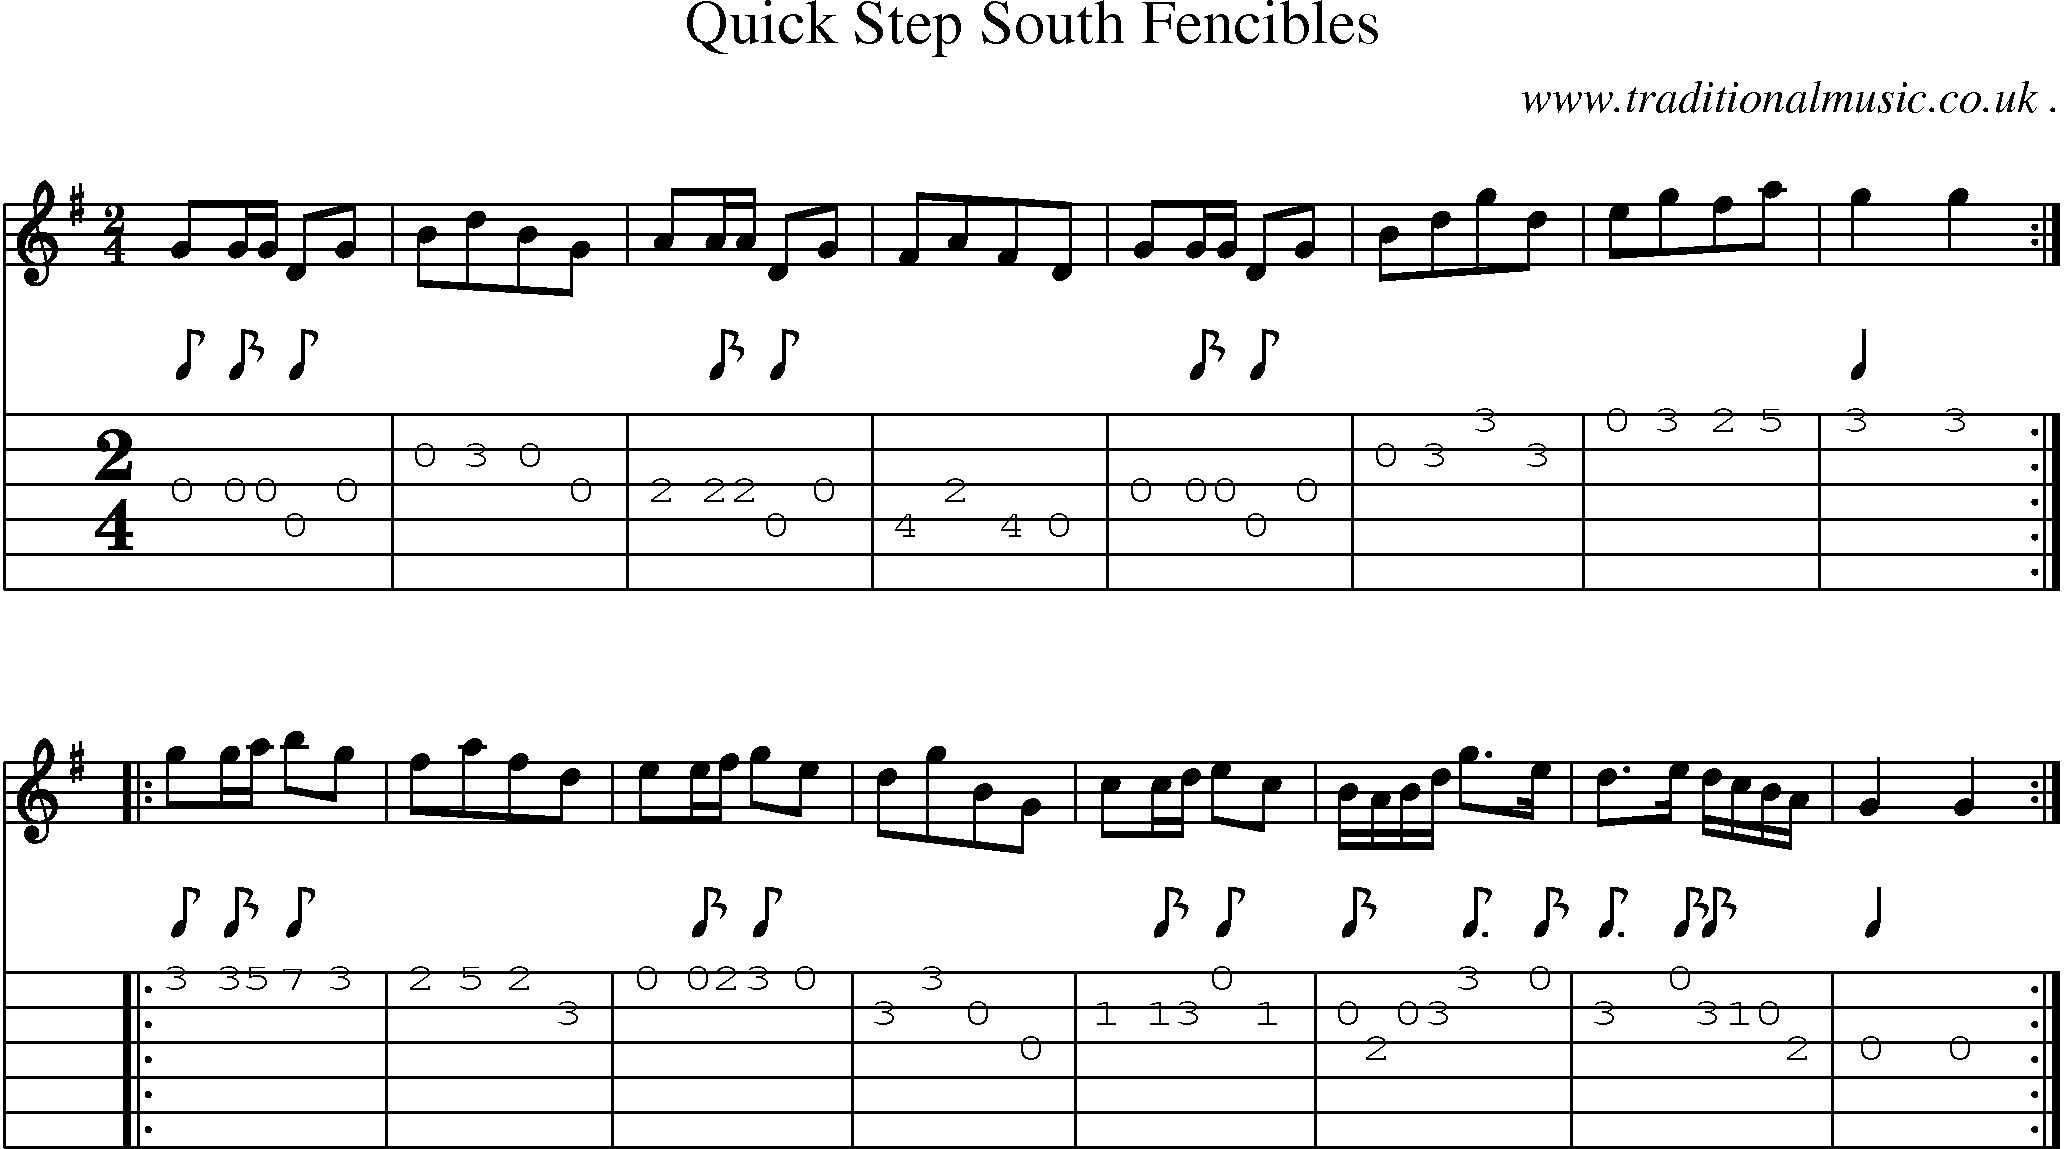 Sheet-music  score, Chords and Guitar Tabs for Quick Step South Fencibles